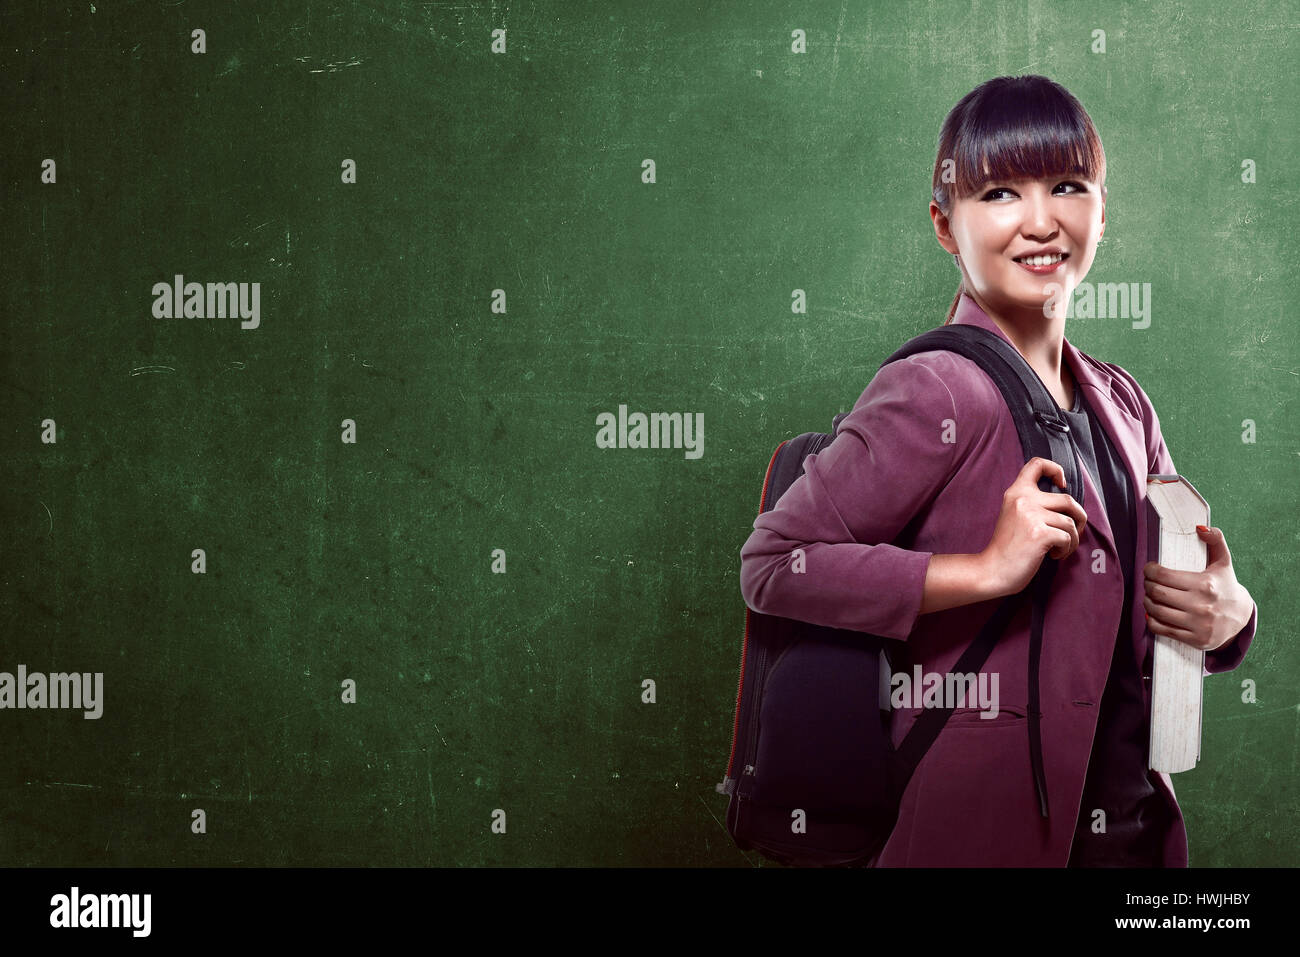 Asian college girl smiling with blackboard background Stock Photo